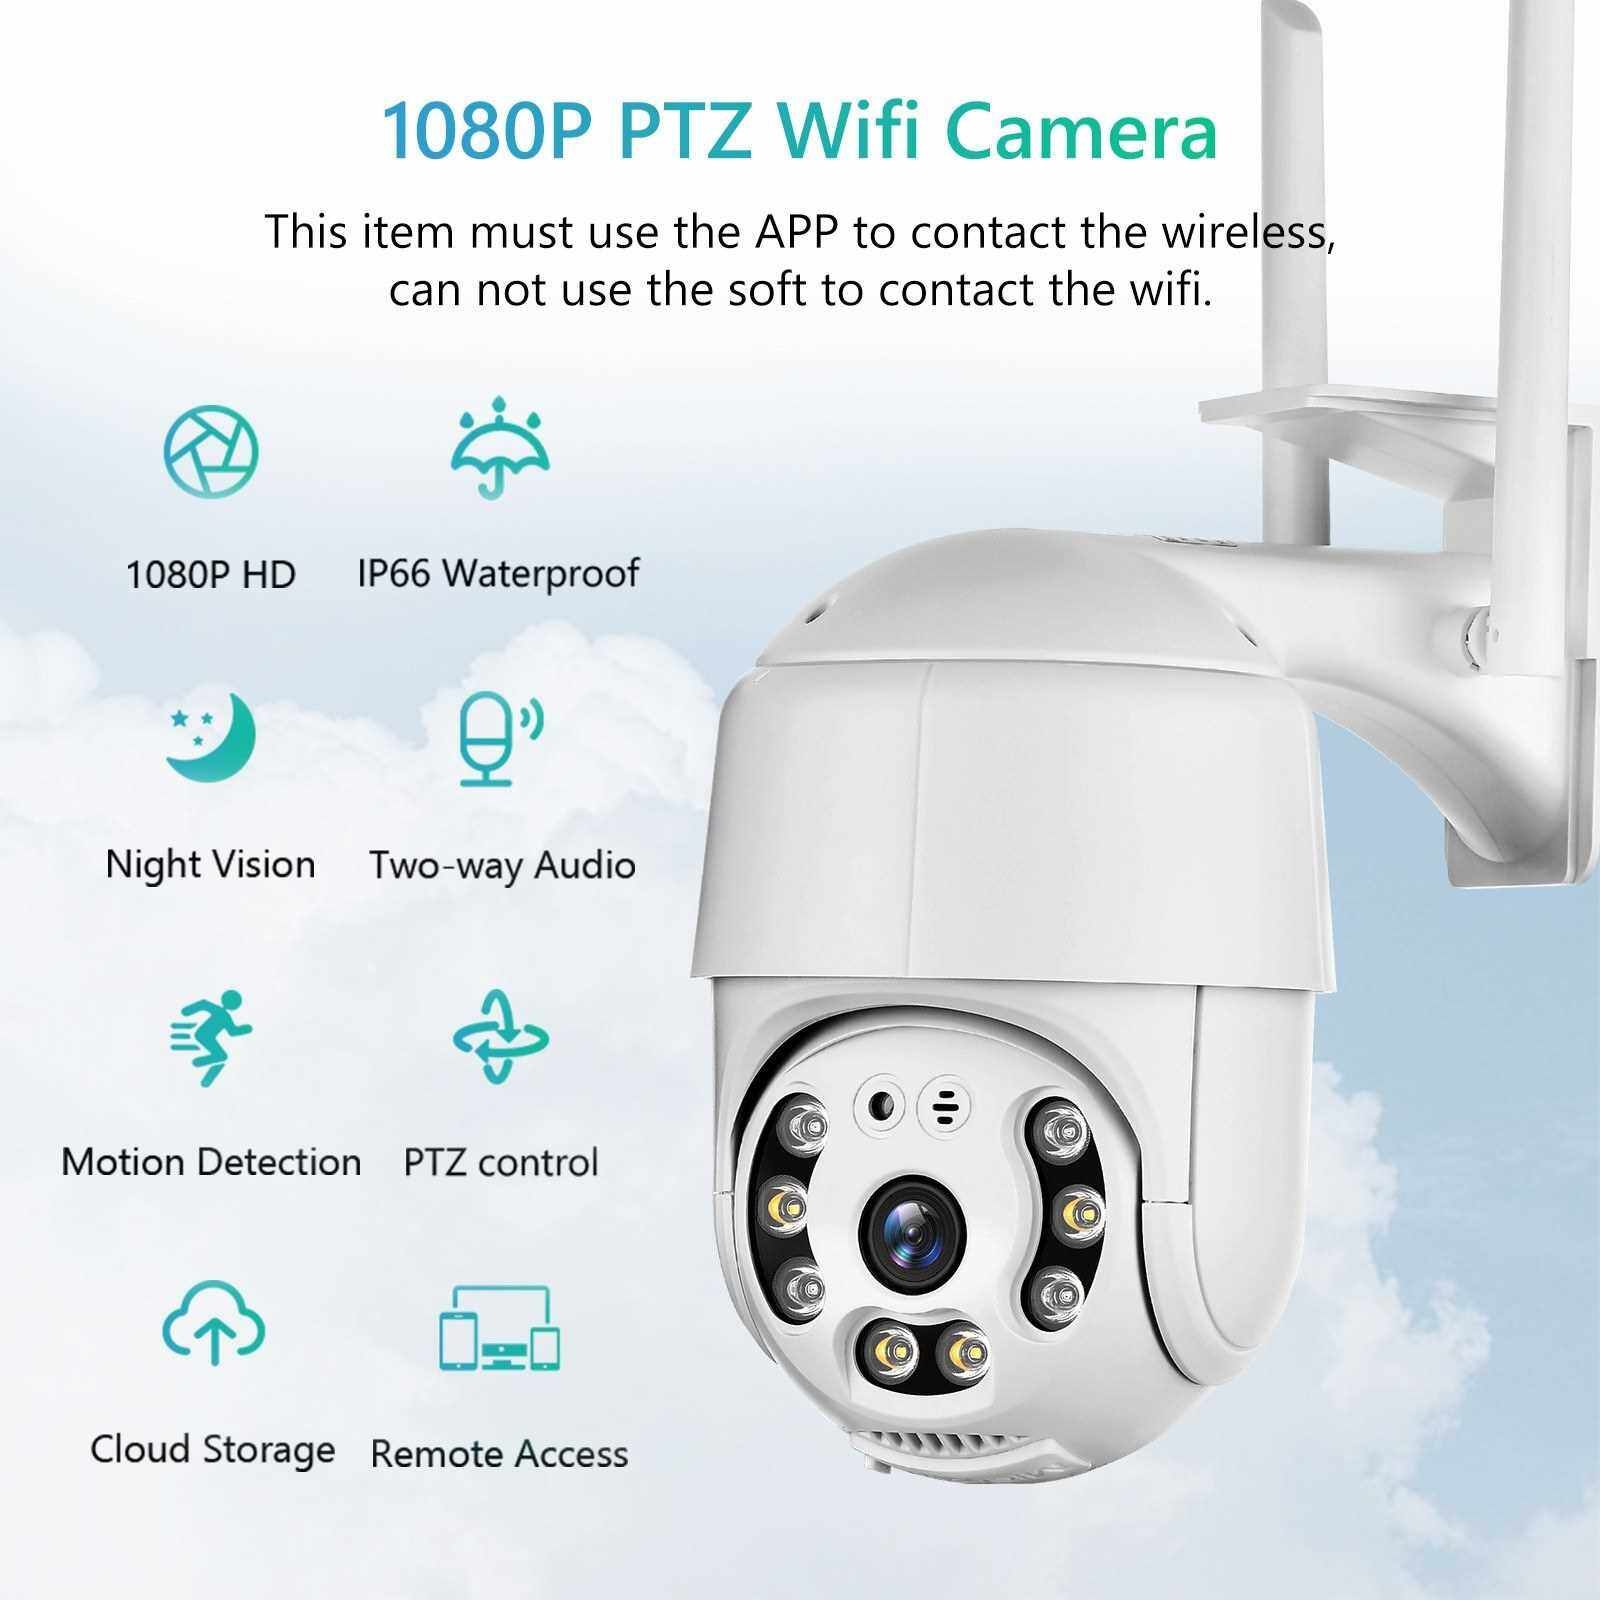 Outdoor PTZ Security Camera, 1080P Home Surveillance Camera with Pan/Tilt, Color Night Vision, 2-Way Audio, Motion Detection, IP66 Weatherproof (White)